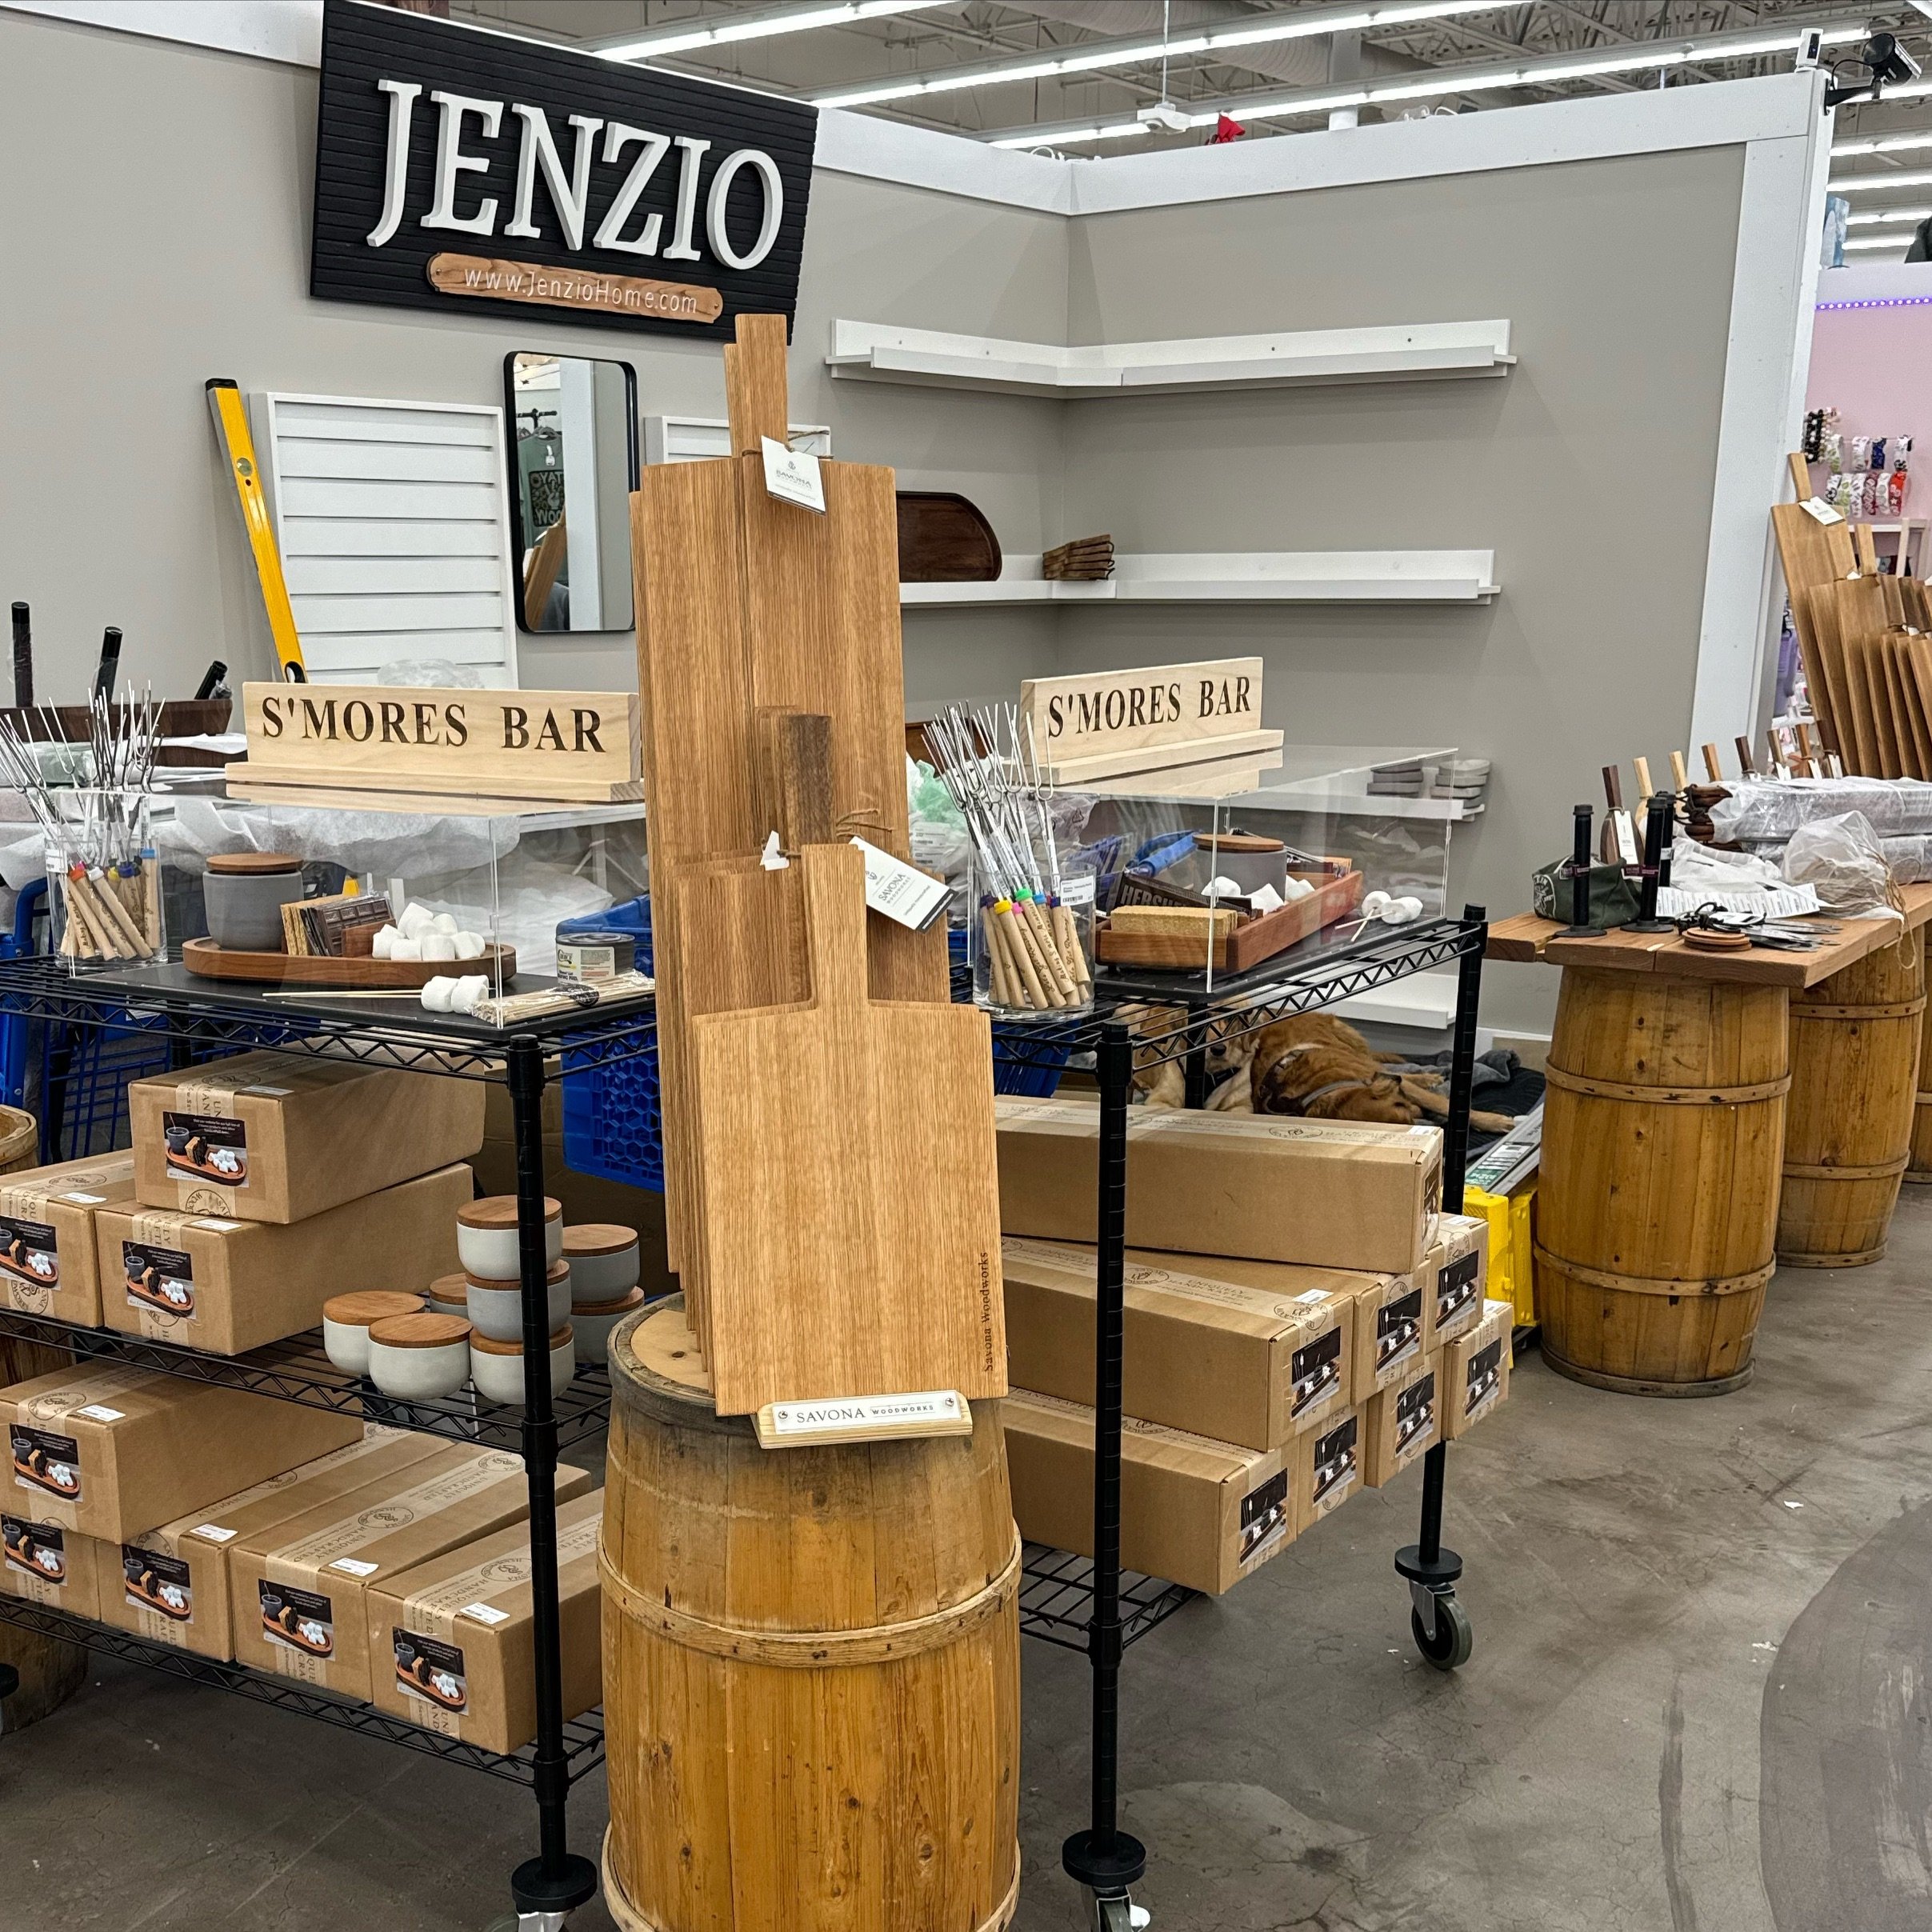 Our second JENZIO retail store is being built right now in AUSTIN, TEXAS! 🤠
.
We are thrilled to be entering this vibrant community!
.
Please visit us @paintedtreesunsetvalley, at the Main Aisle crossroads in Space E14.
.
.
.
@paintedtreeboutiques
@